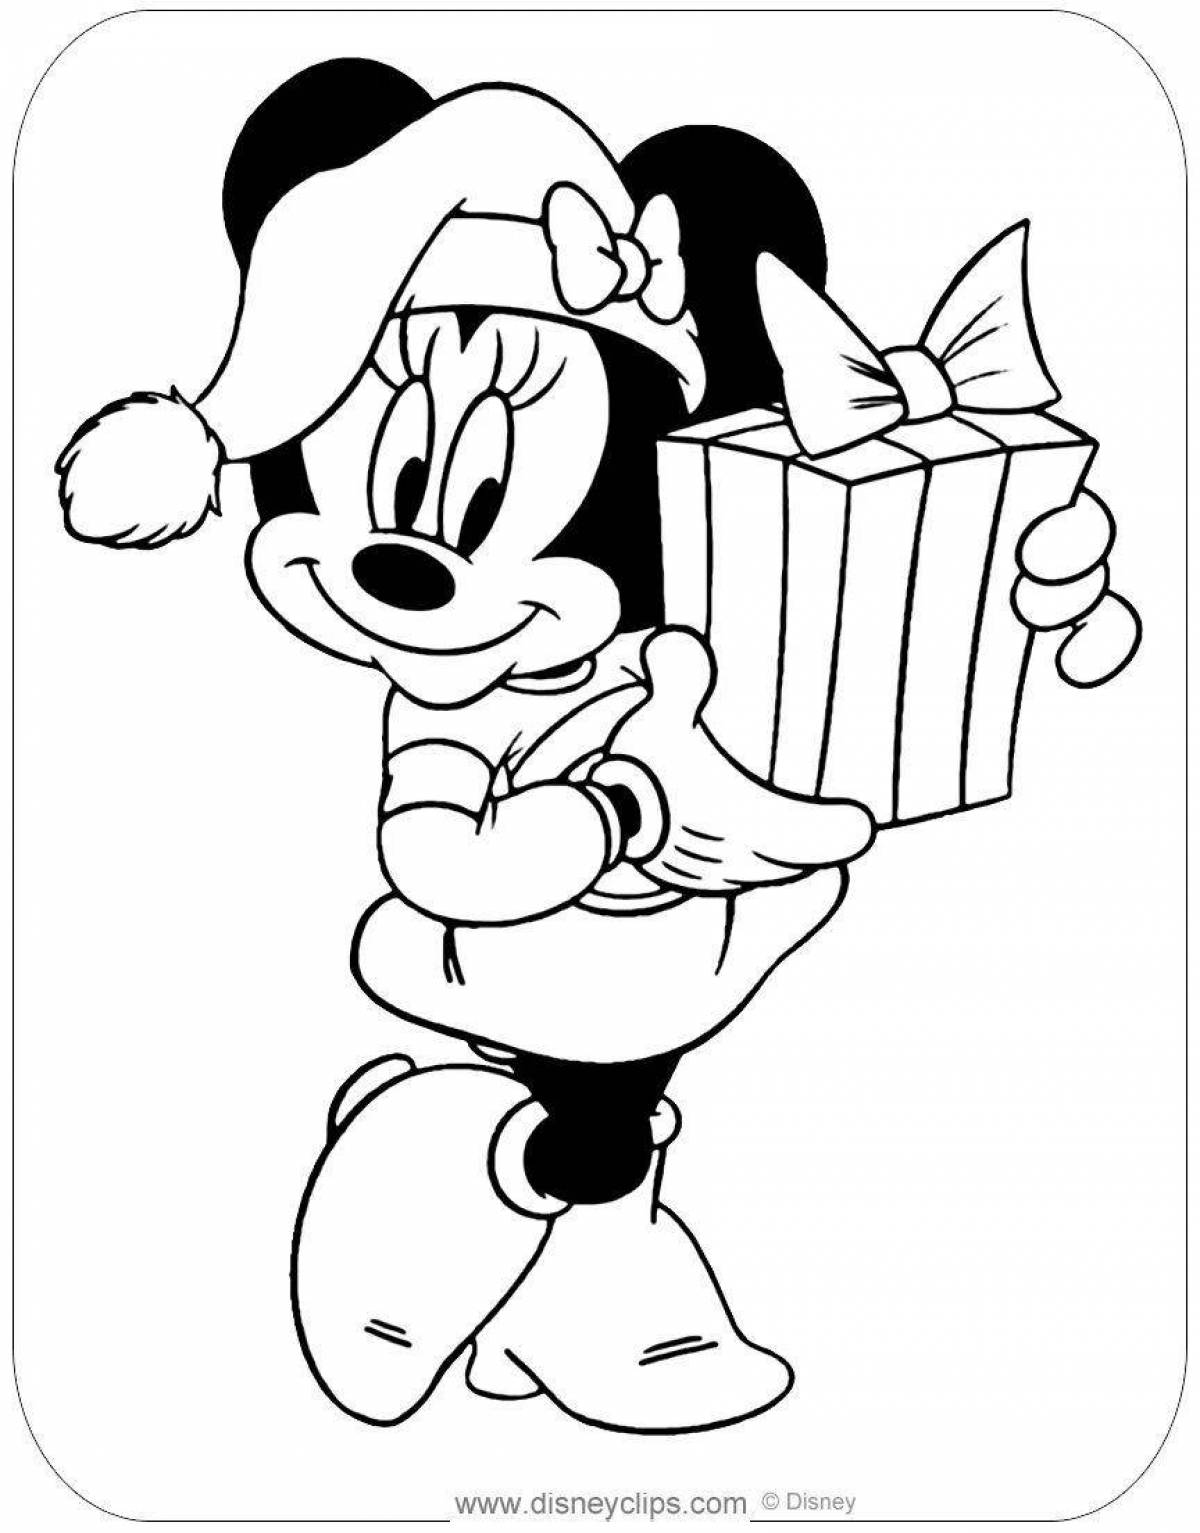 Wonderful Mickey Mouse Christmas coloring book